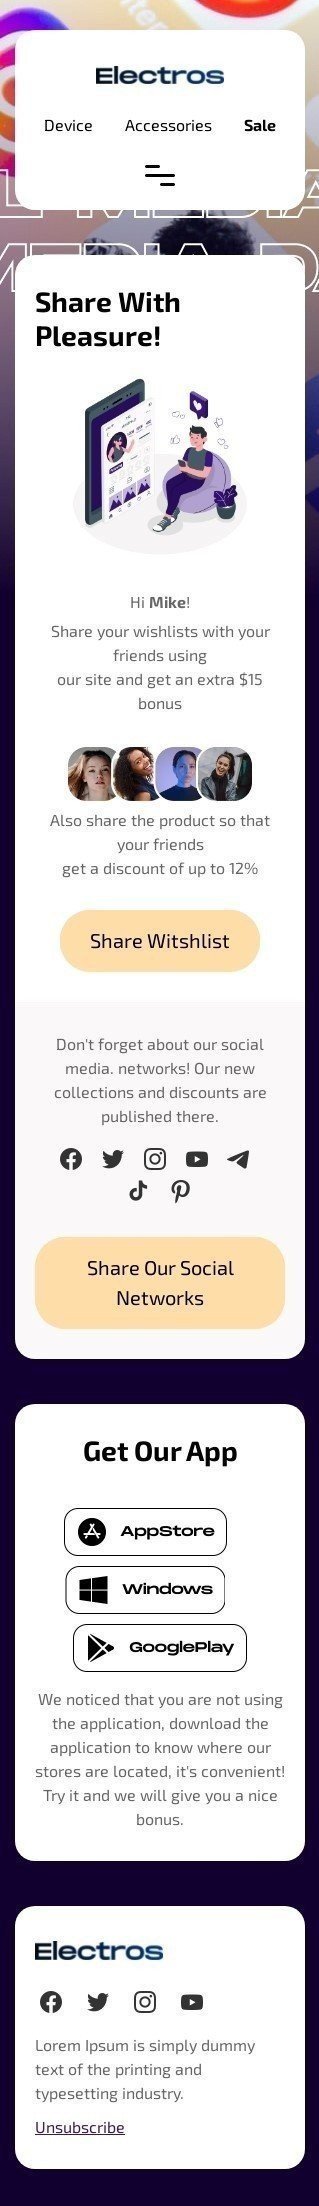 Social Media Day Email Template "Share Your Wishlists for a Bonus" for Ecommerce industry mobile view